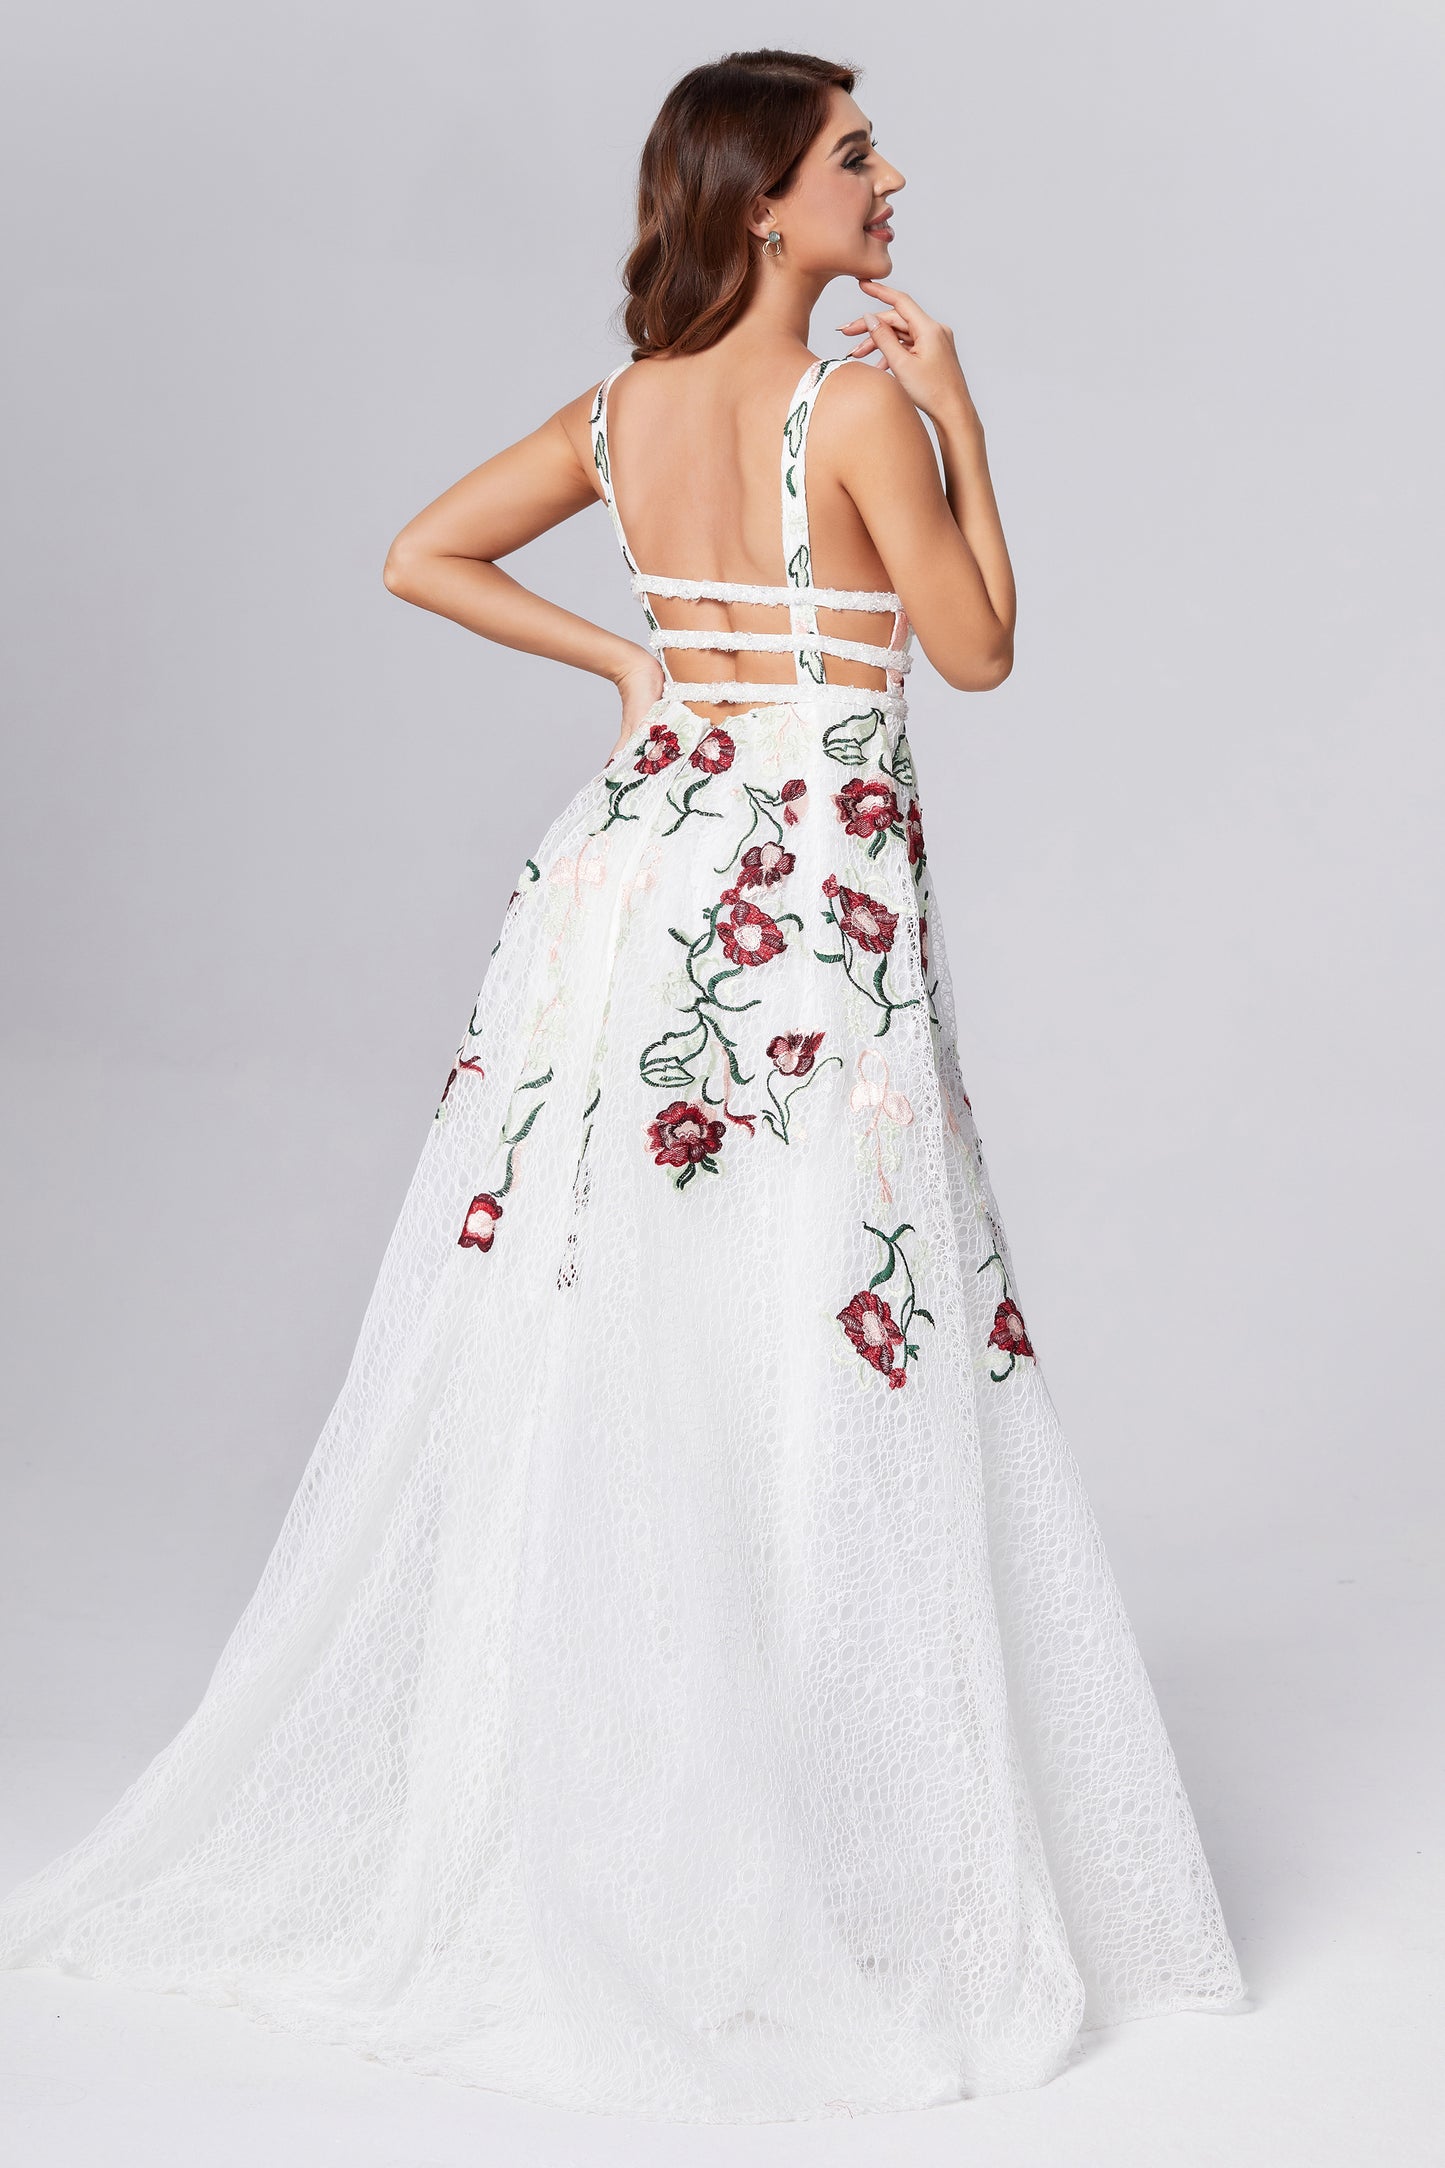 Floral Backless Lace Prom Dresses